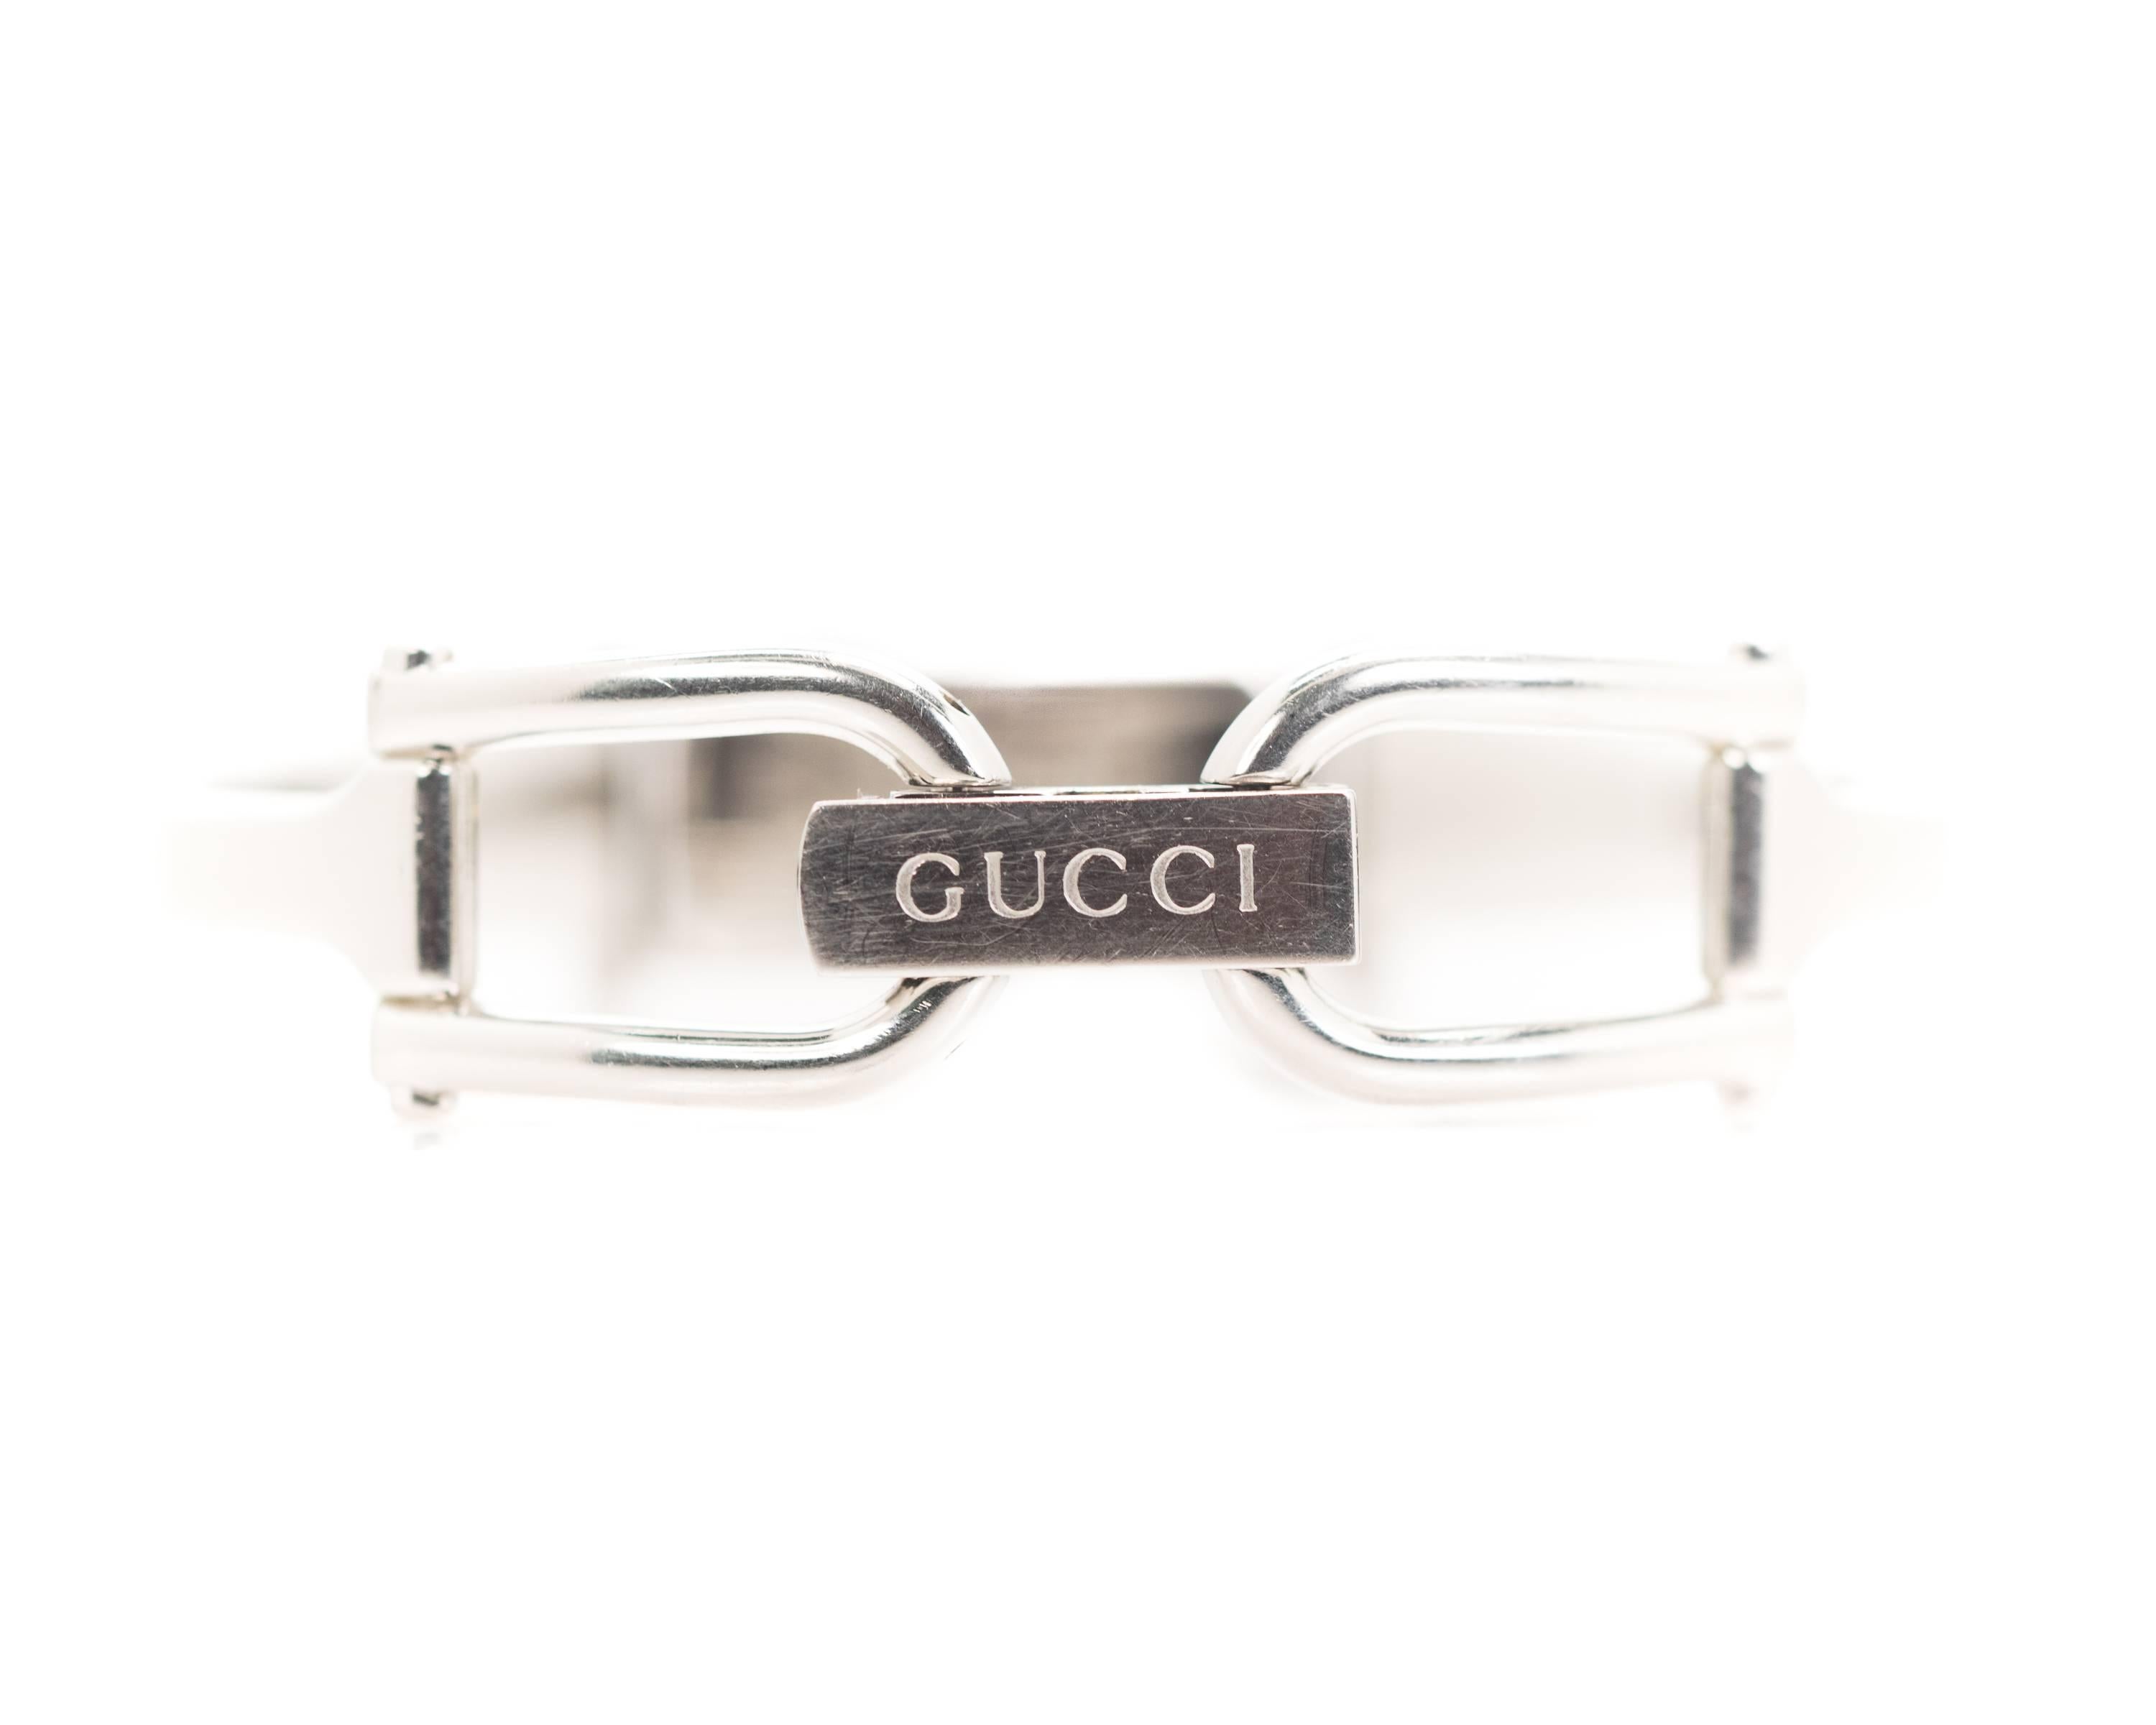 Gucci Ladies Wrist Watch - Stainless Steel

Features Gucci's Signature Horsebit design clasp, a Silvered Dial and Stainless Steel Case & Bracelet. 
This classic Designer watch doubles as a bangle and a wrist watch. The clean, simple design makes it